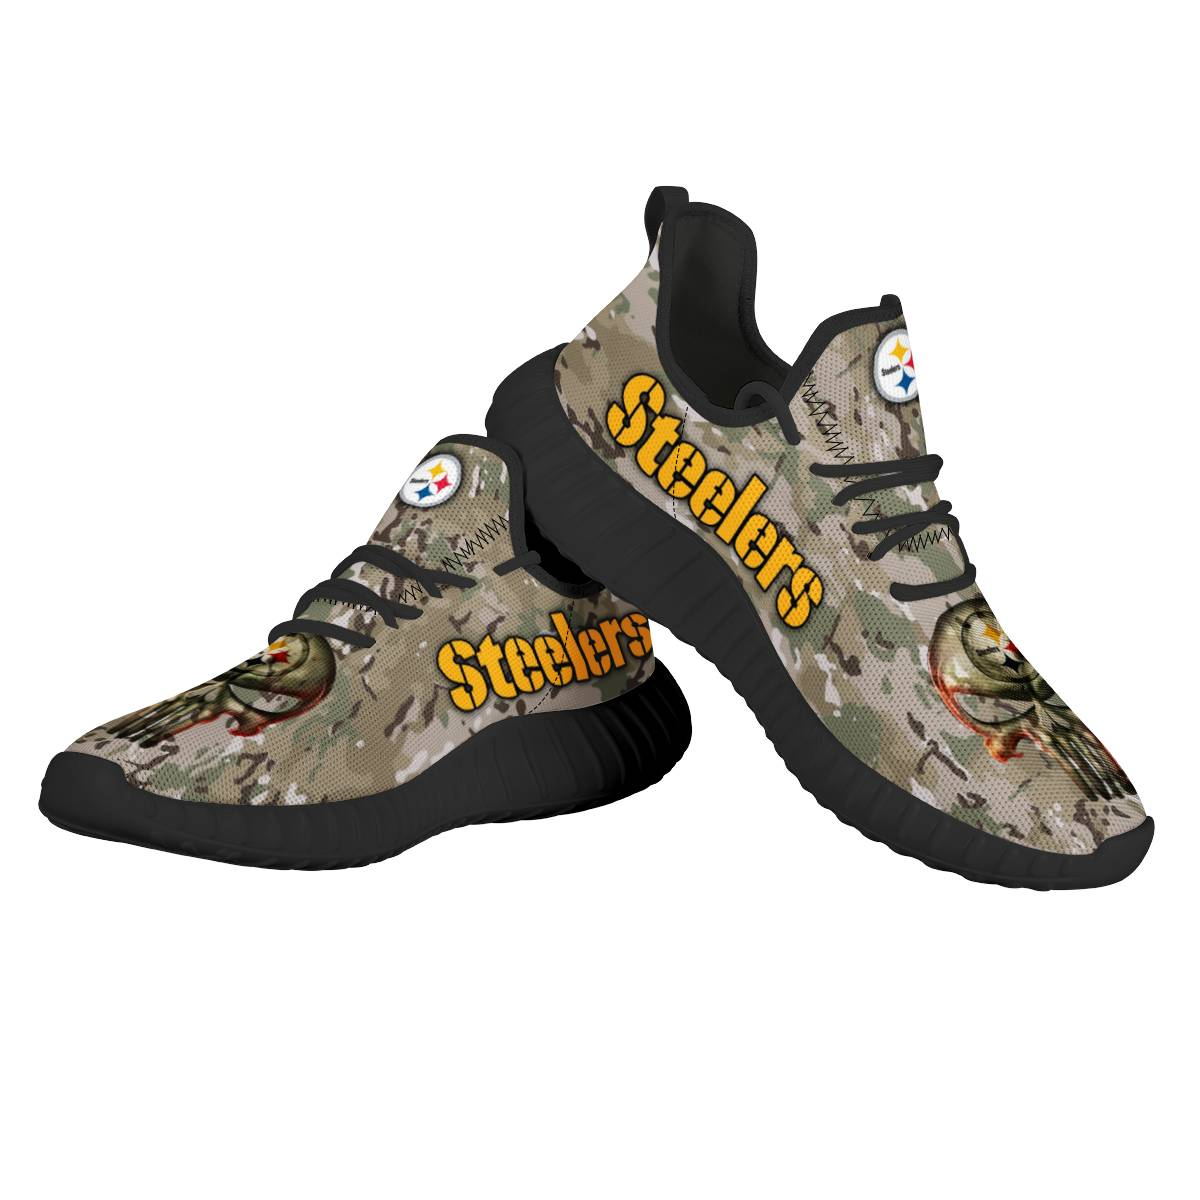 Men's NFL Pittsburgh Steelers Mesh Knit Sneakers/Shoes 010